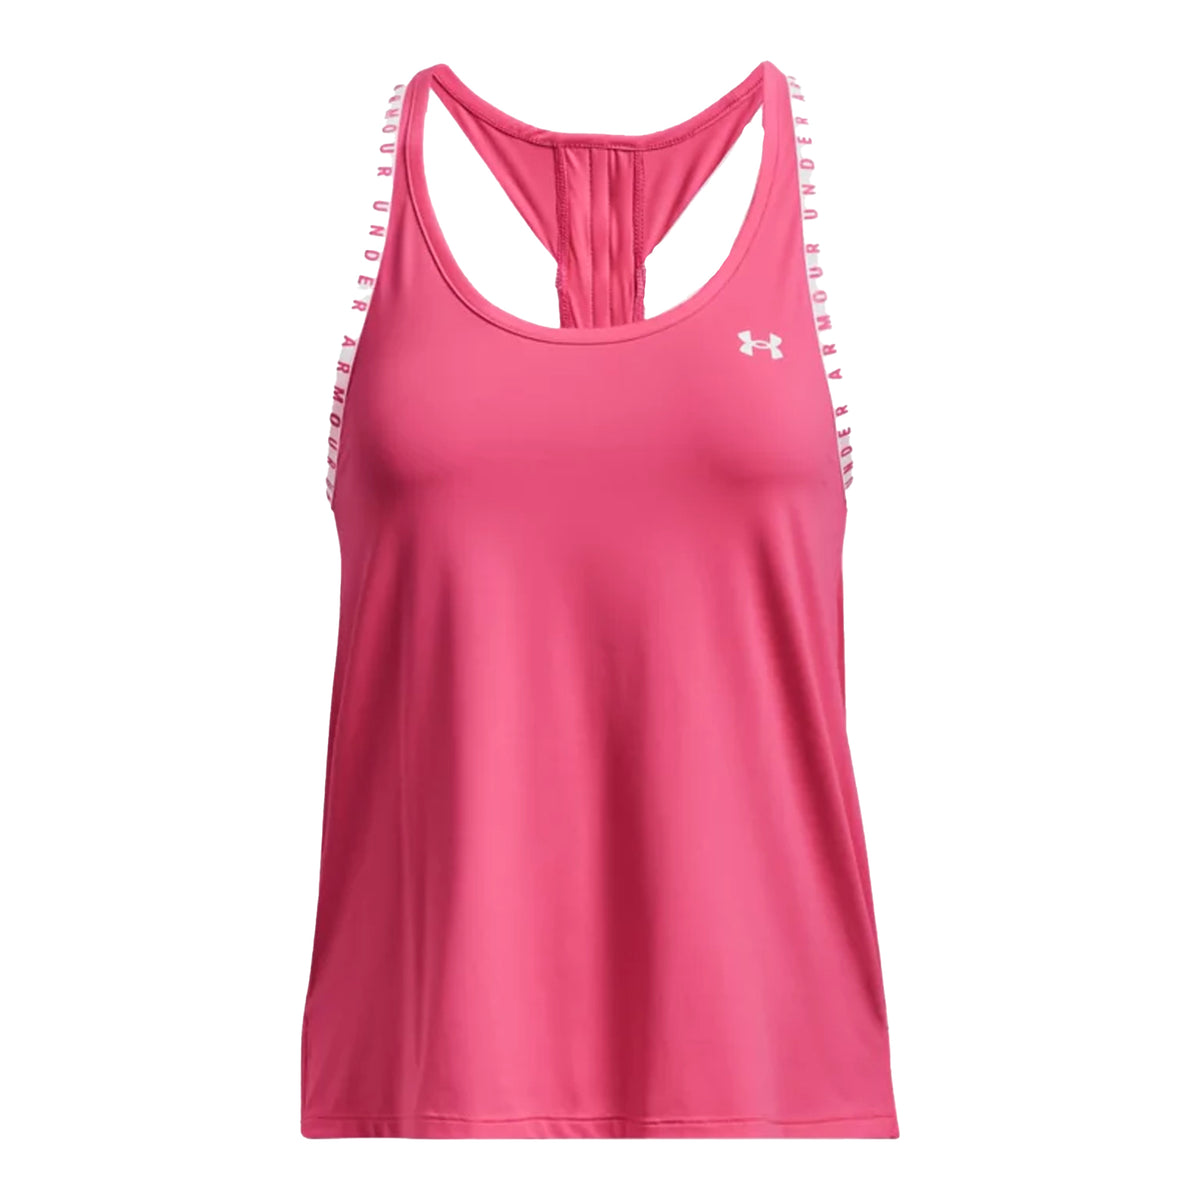 Under Armour Womens Knockout Tank: Pink